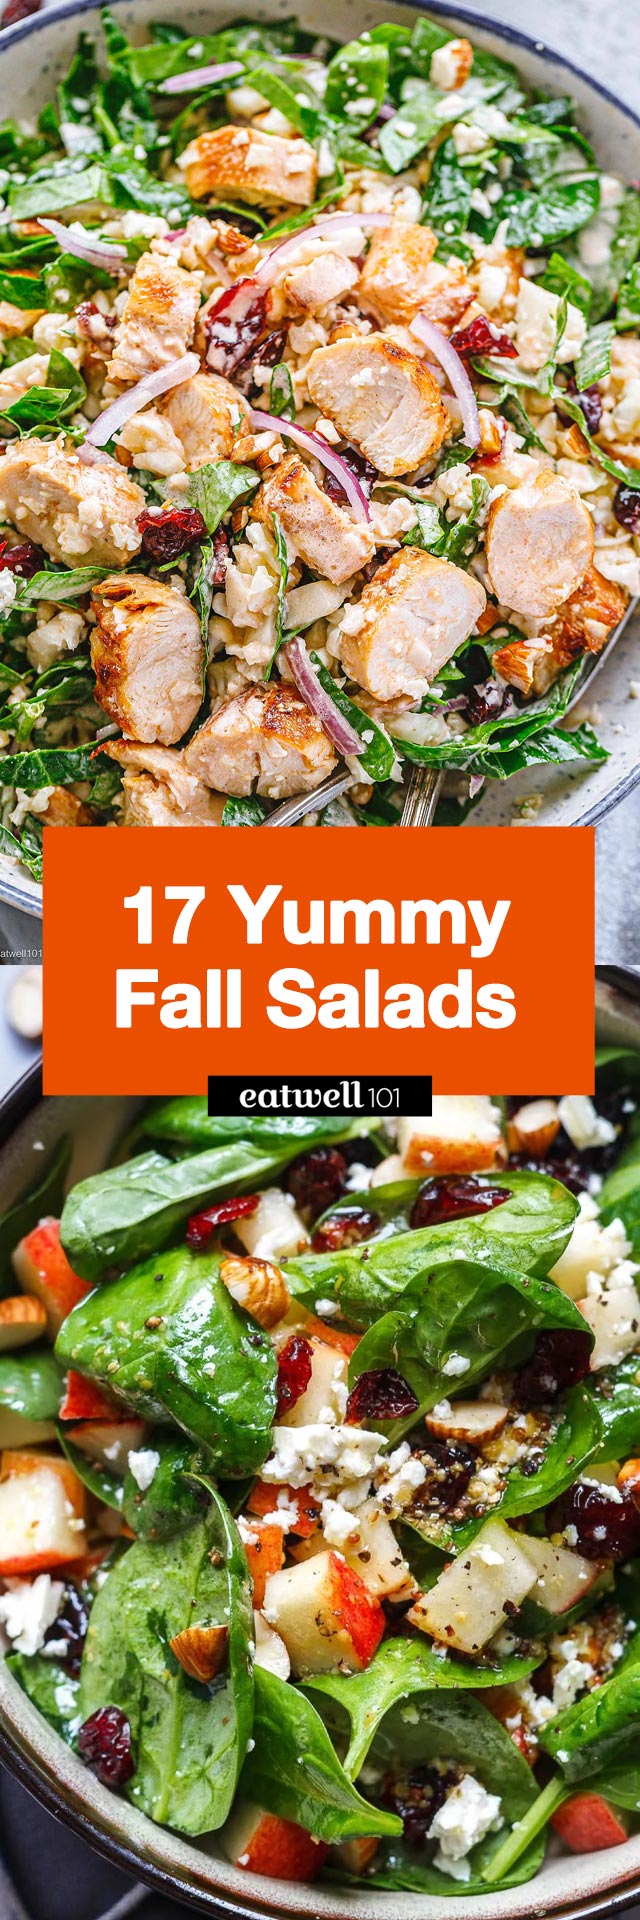 17 Yummy Fall Salads for a Lighter Lunch - #fall #salad #reicpes - These Fall salad recipes will have you happily eating your greens all season long.